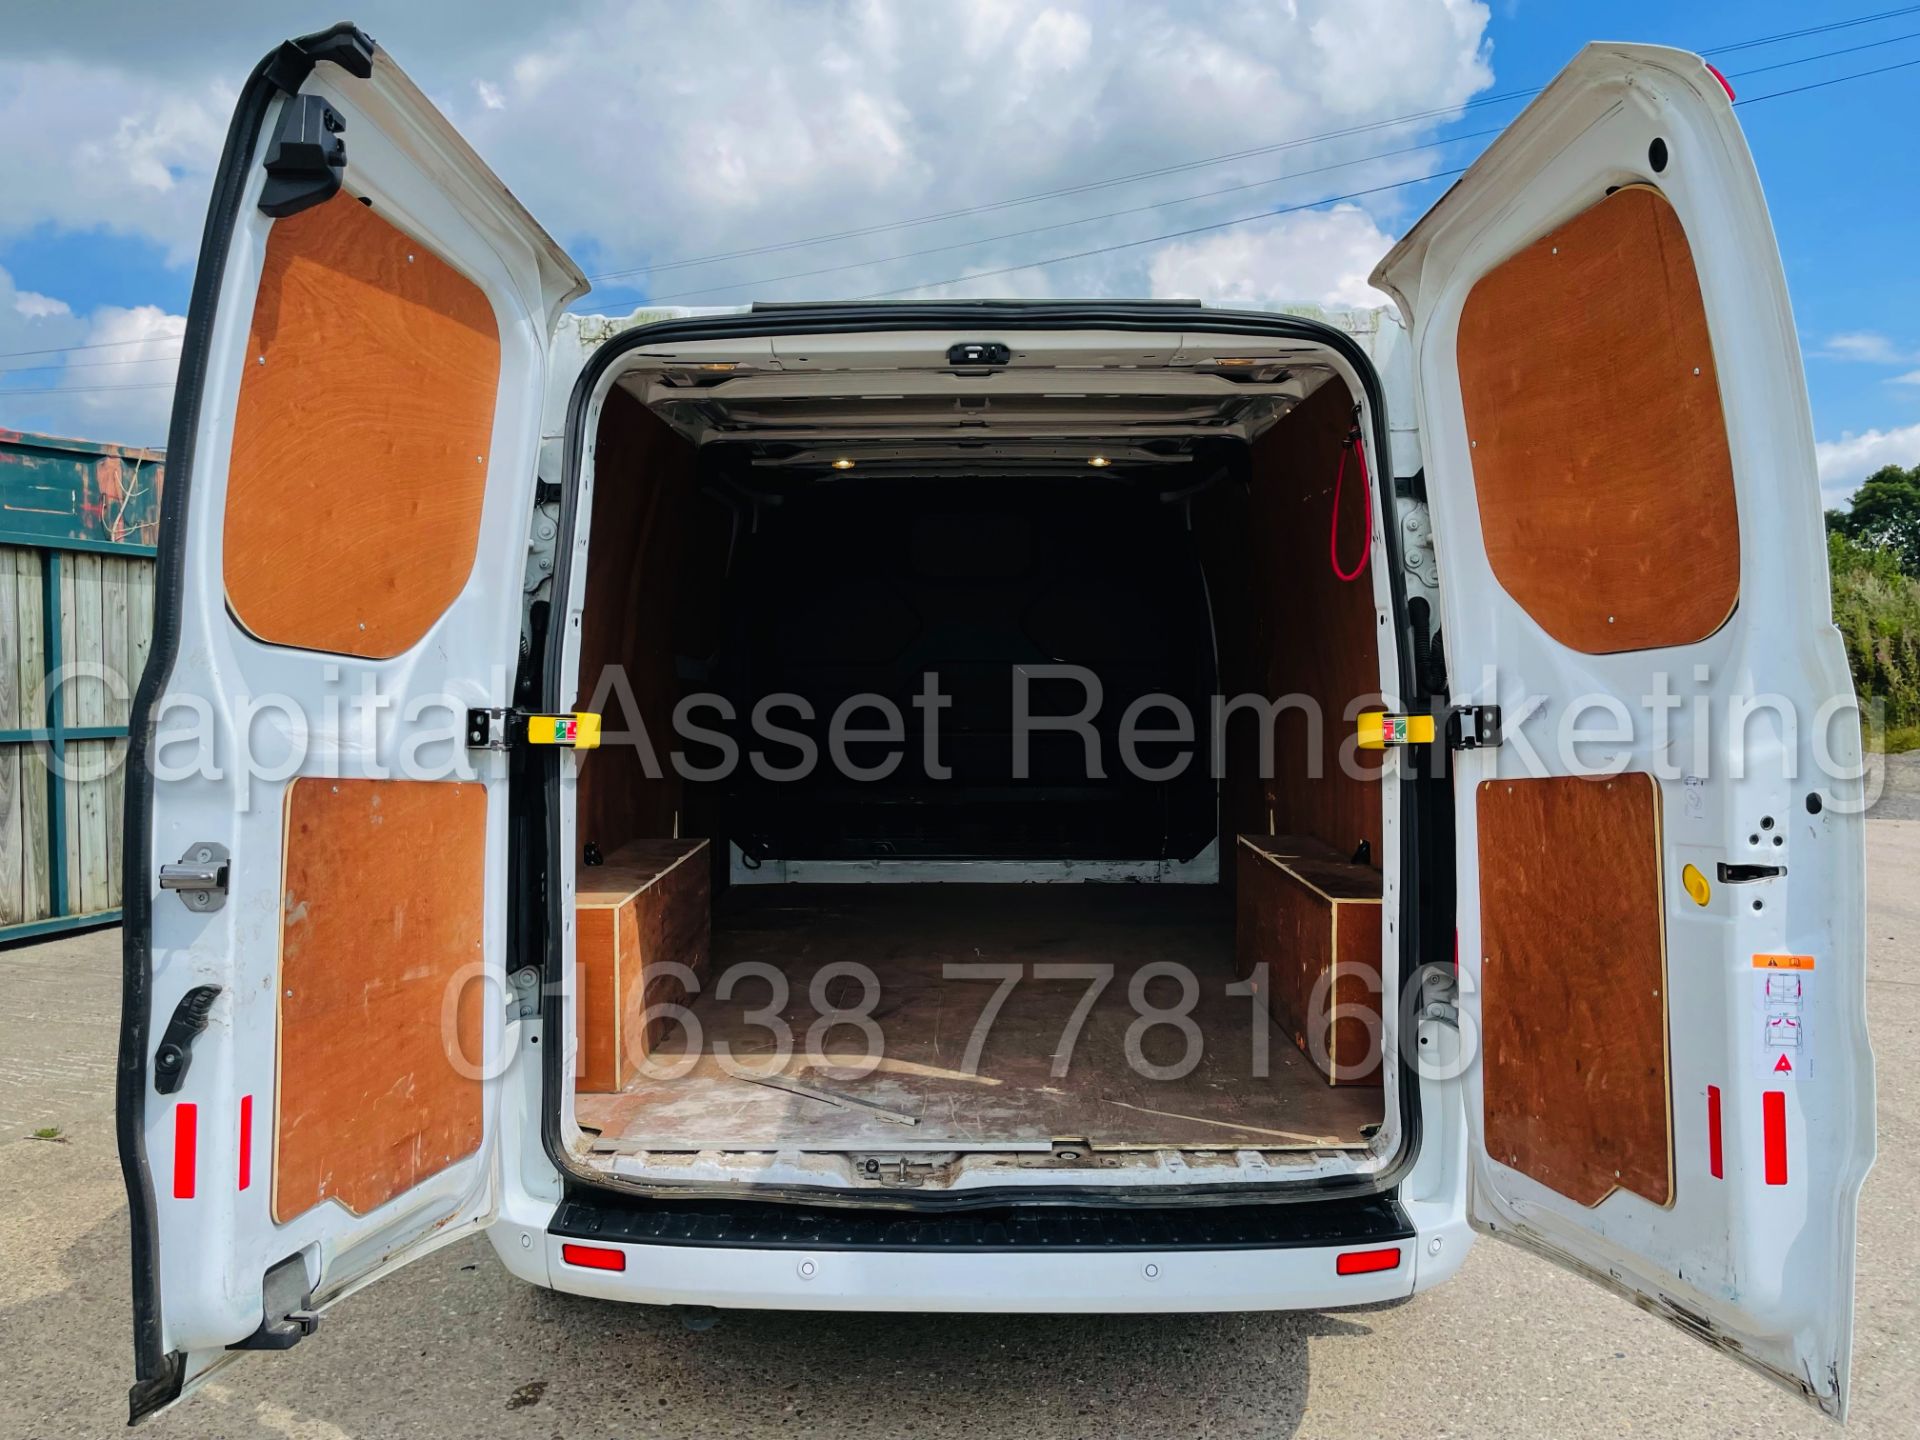 FORD TRANSIT CUSTOM *LIMITED EDITION* PANEL VAN (2018 - NEW MODEL) '2.0 TDCI - EURO 6 - 6 SPEED' - Image 28 of 46